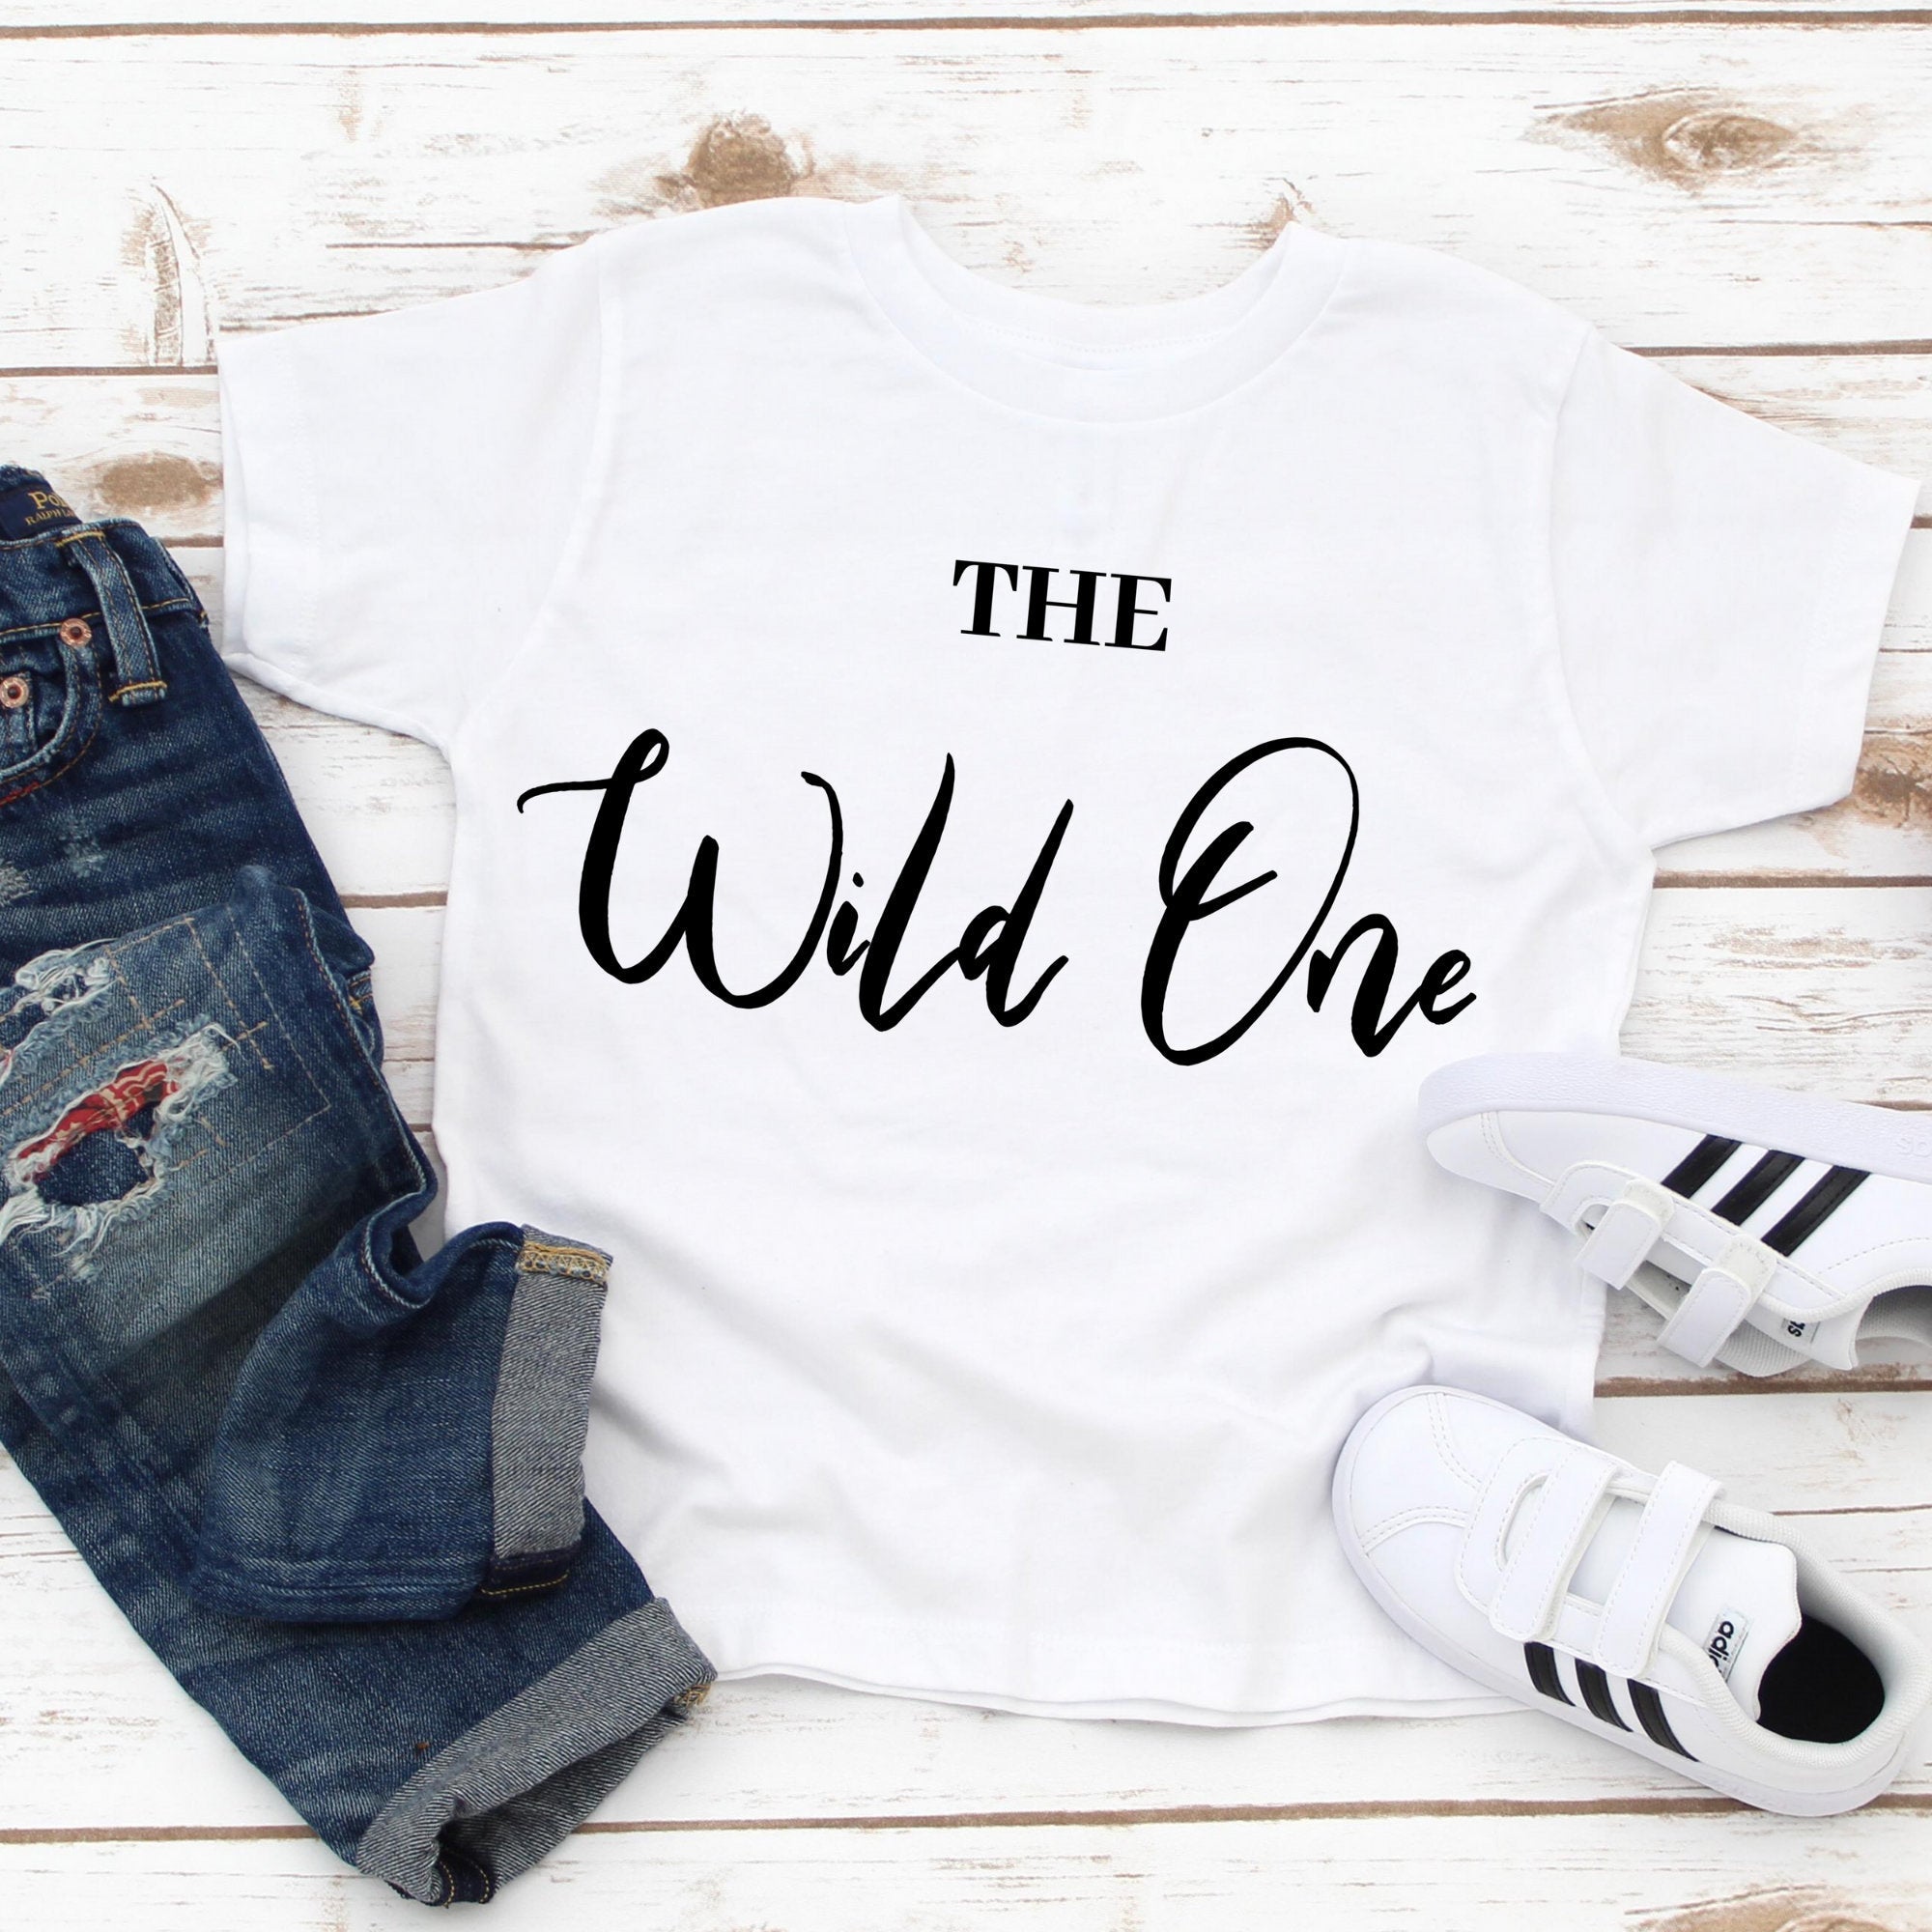 Mother Son Matching Shirts,Mother Daughter Matching Shirts,Funny Matching Shirts,Mom of the Wild One Ladies Tee & The Wild One Toddler Tee - MamaBuzz Creations